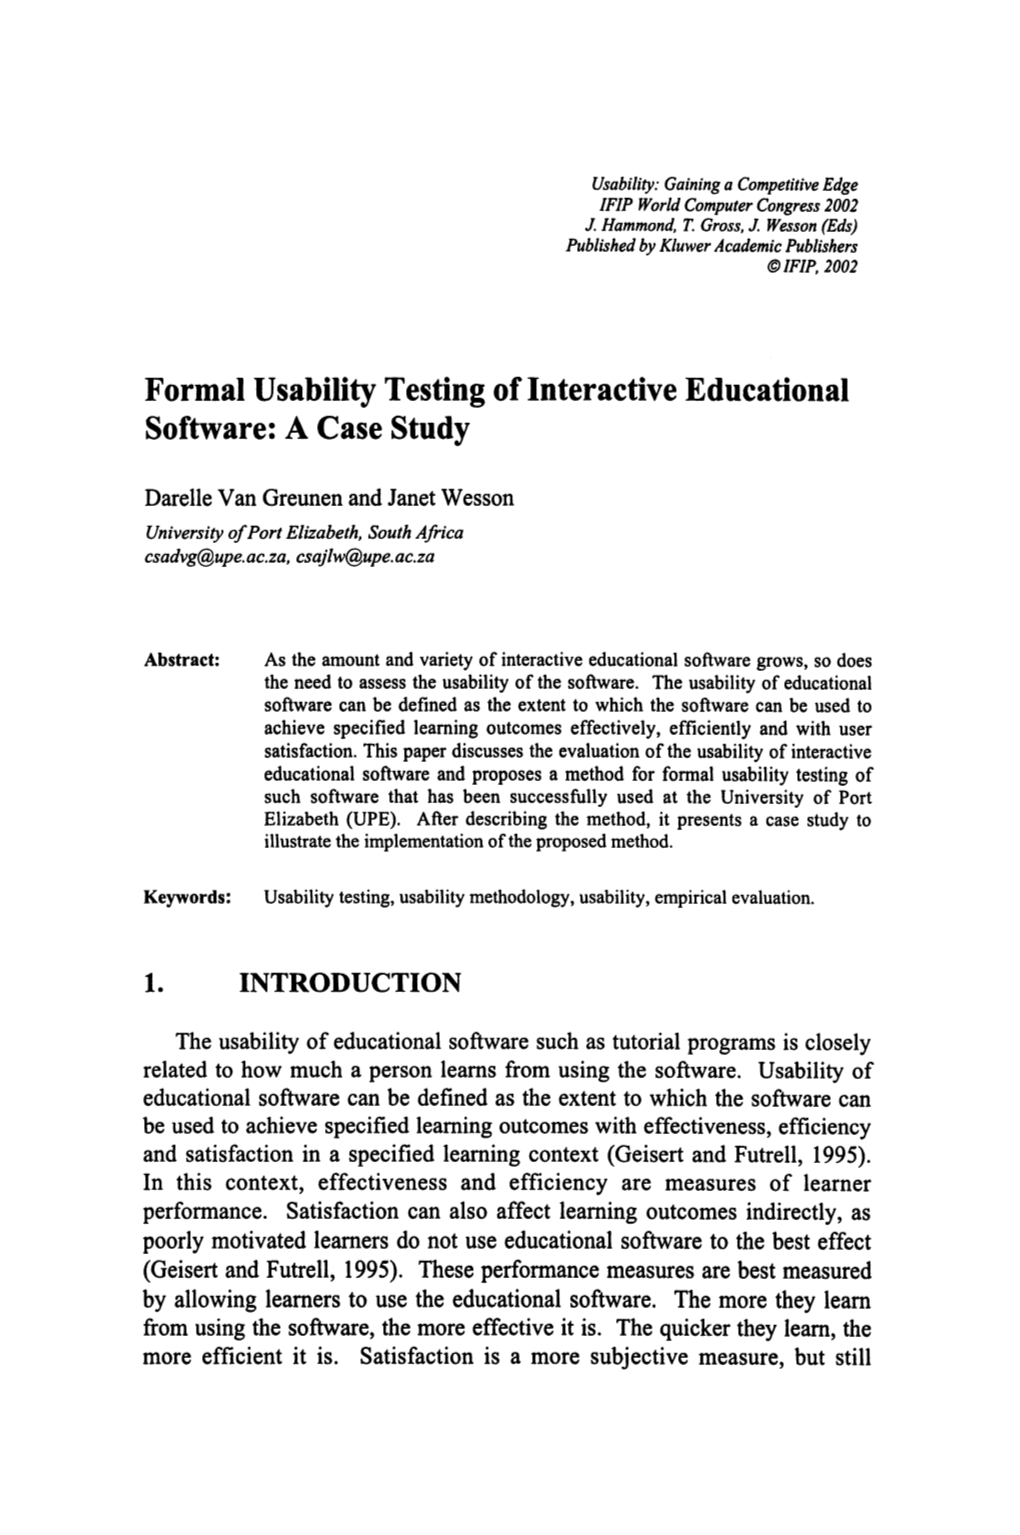 Formal Usability Testing of Interactive Educational Software: a Case Study